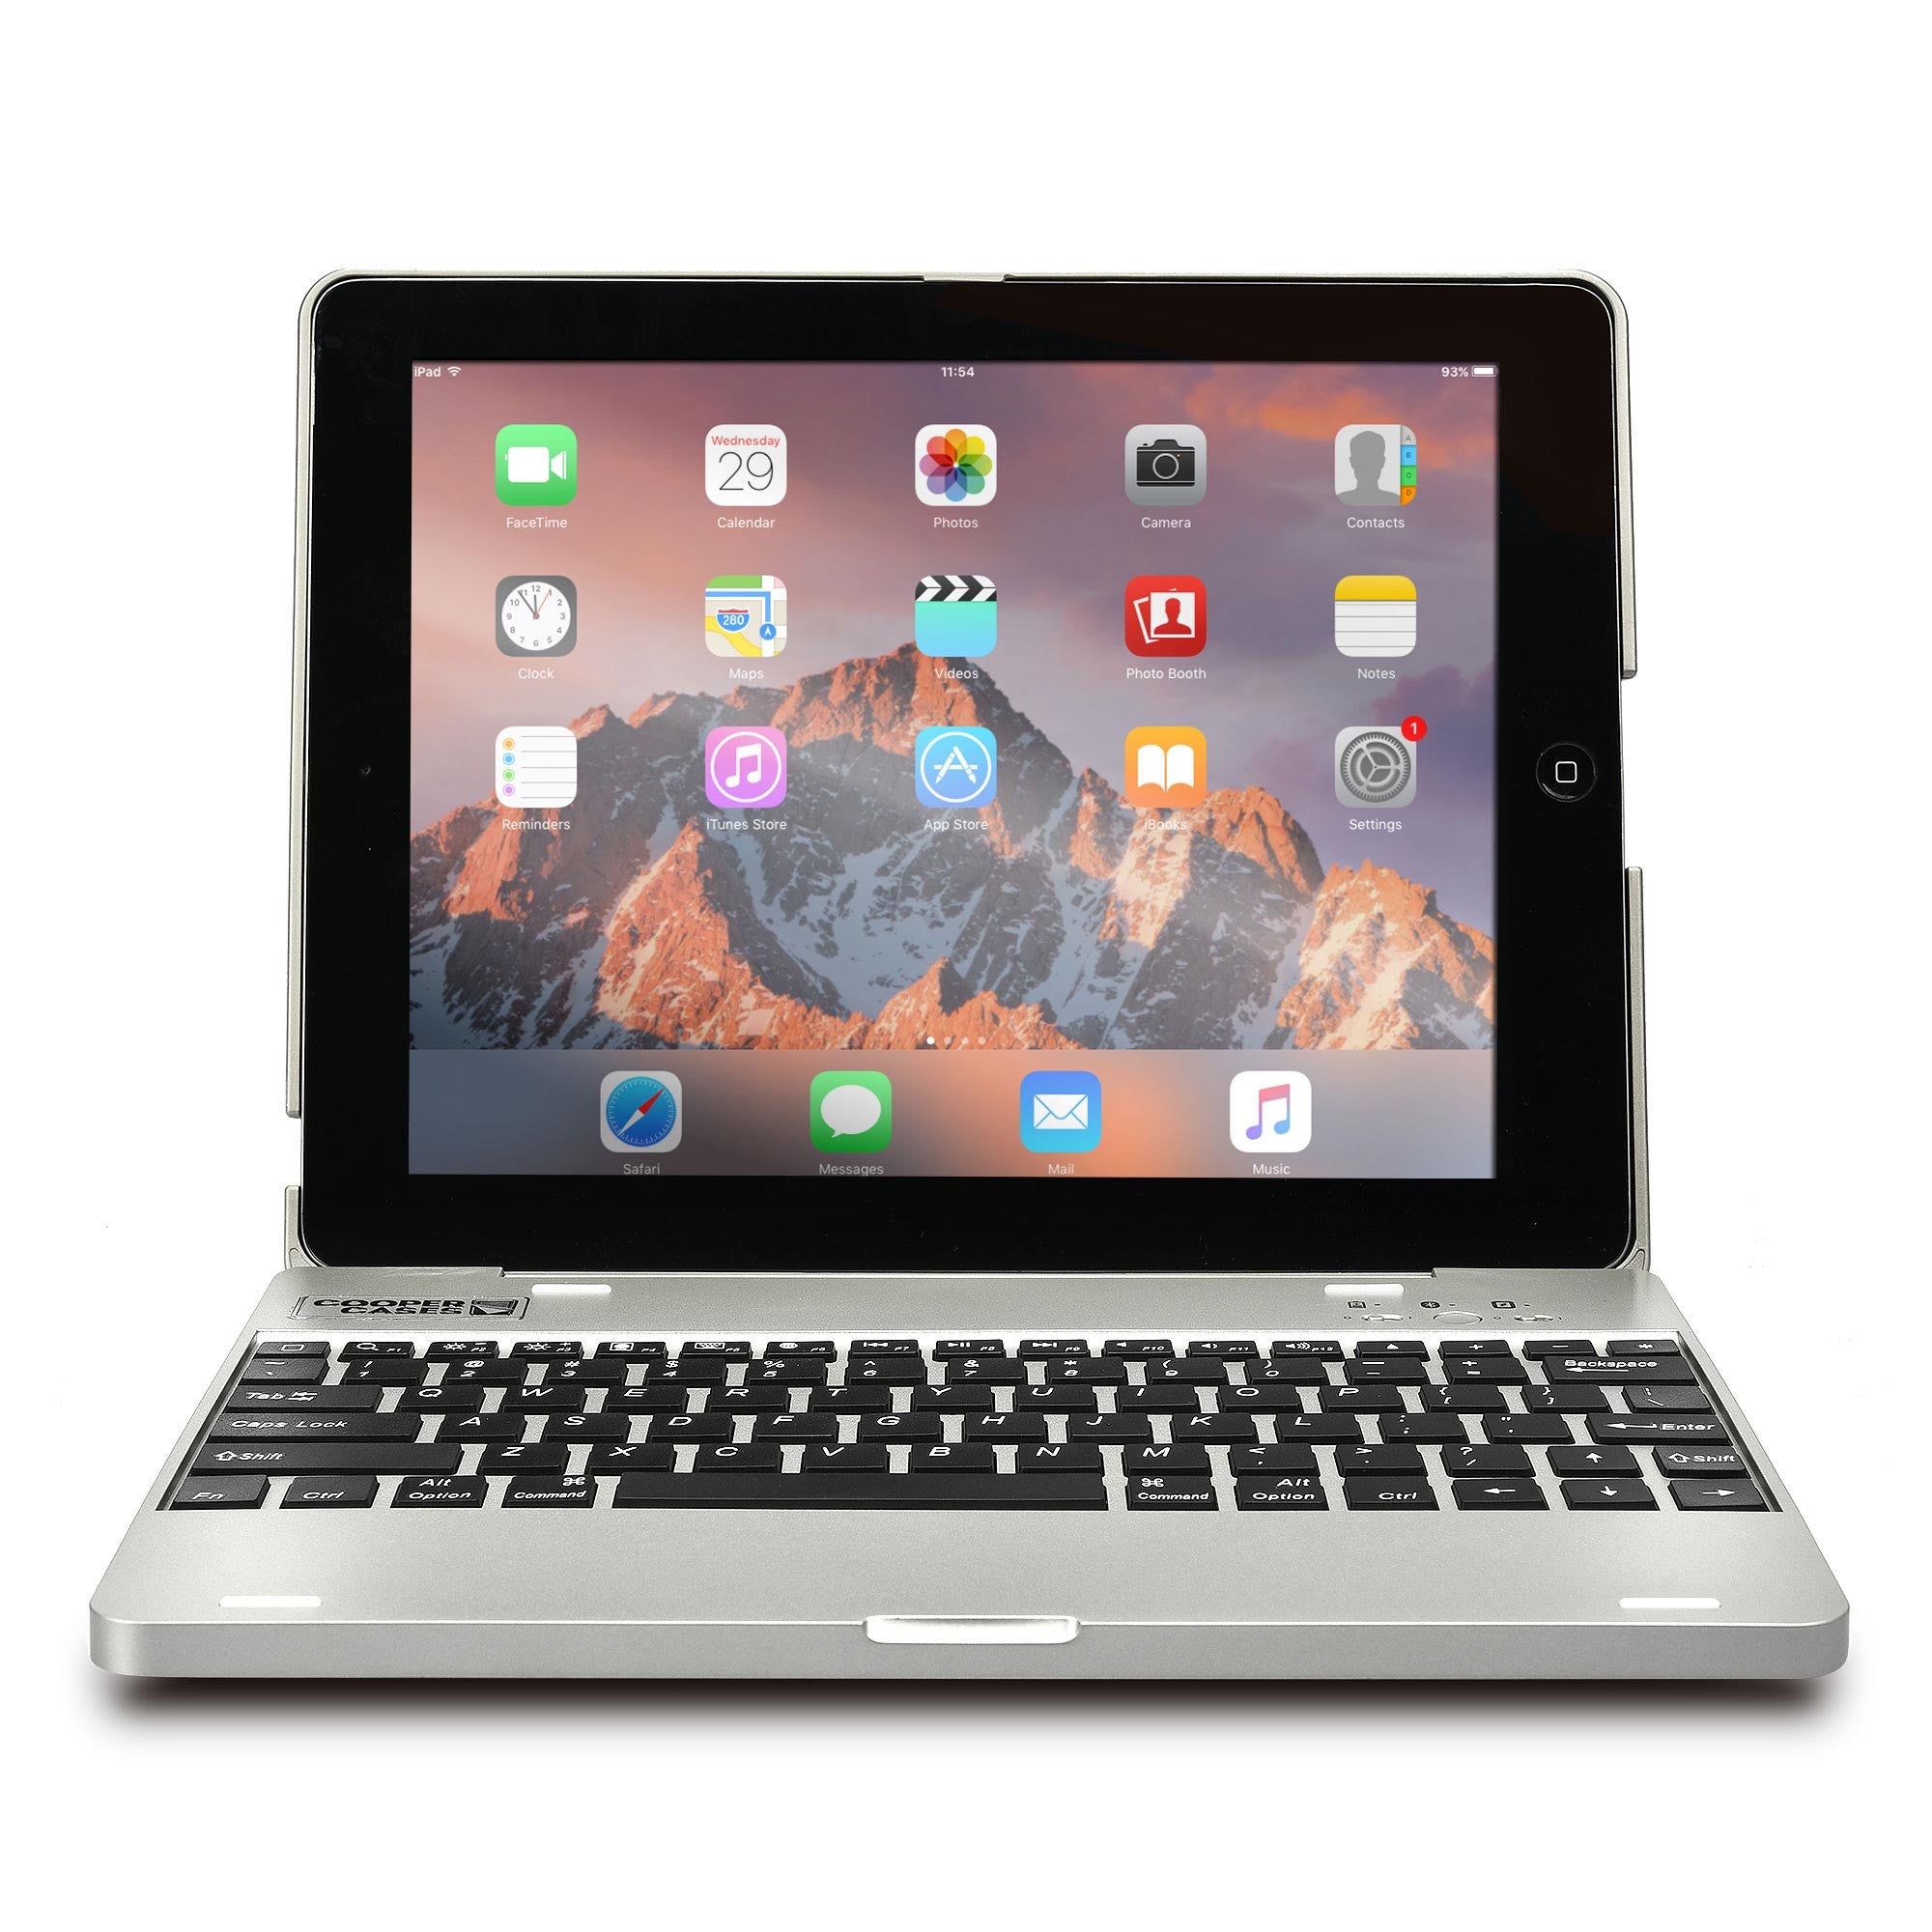 [LIQUIDATION] Cooper Kai Skel P1 Clamshell Keyboard Case with Built-in Powerbank for Apple iPad 2/3/4